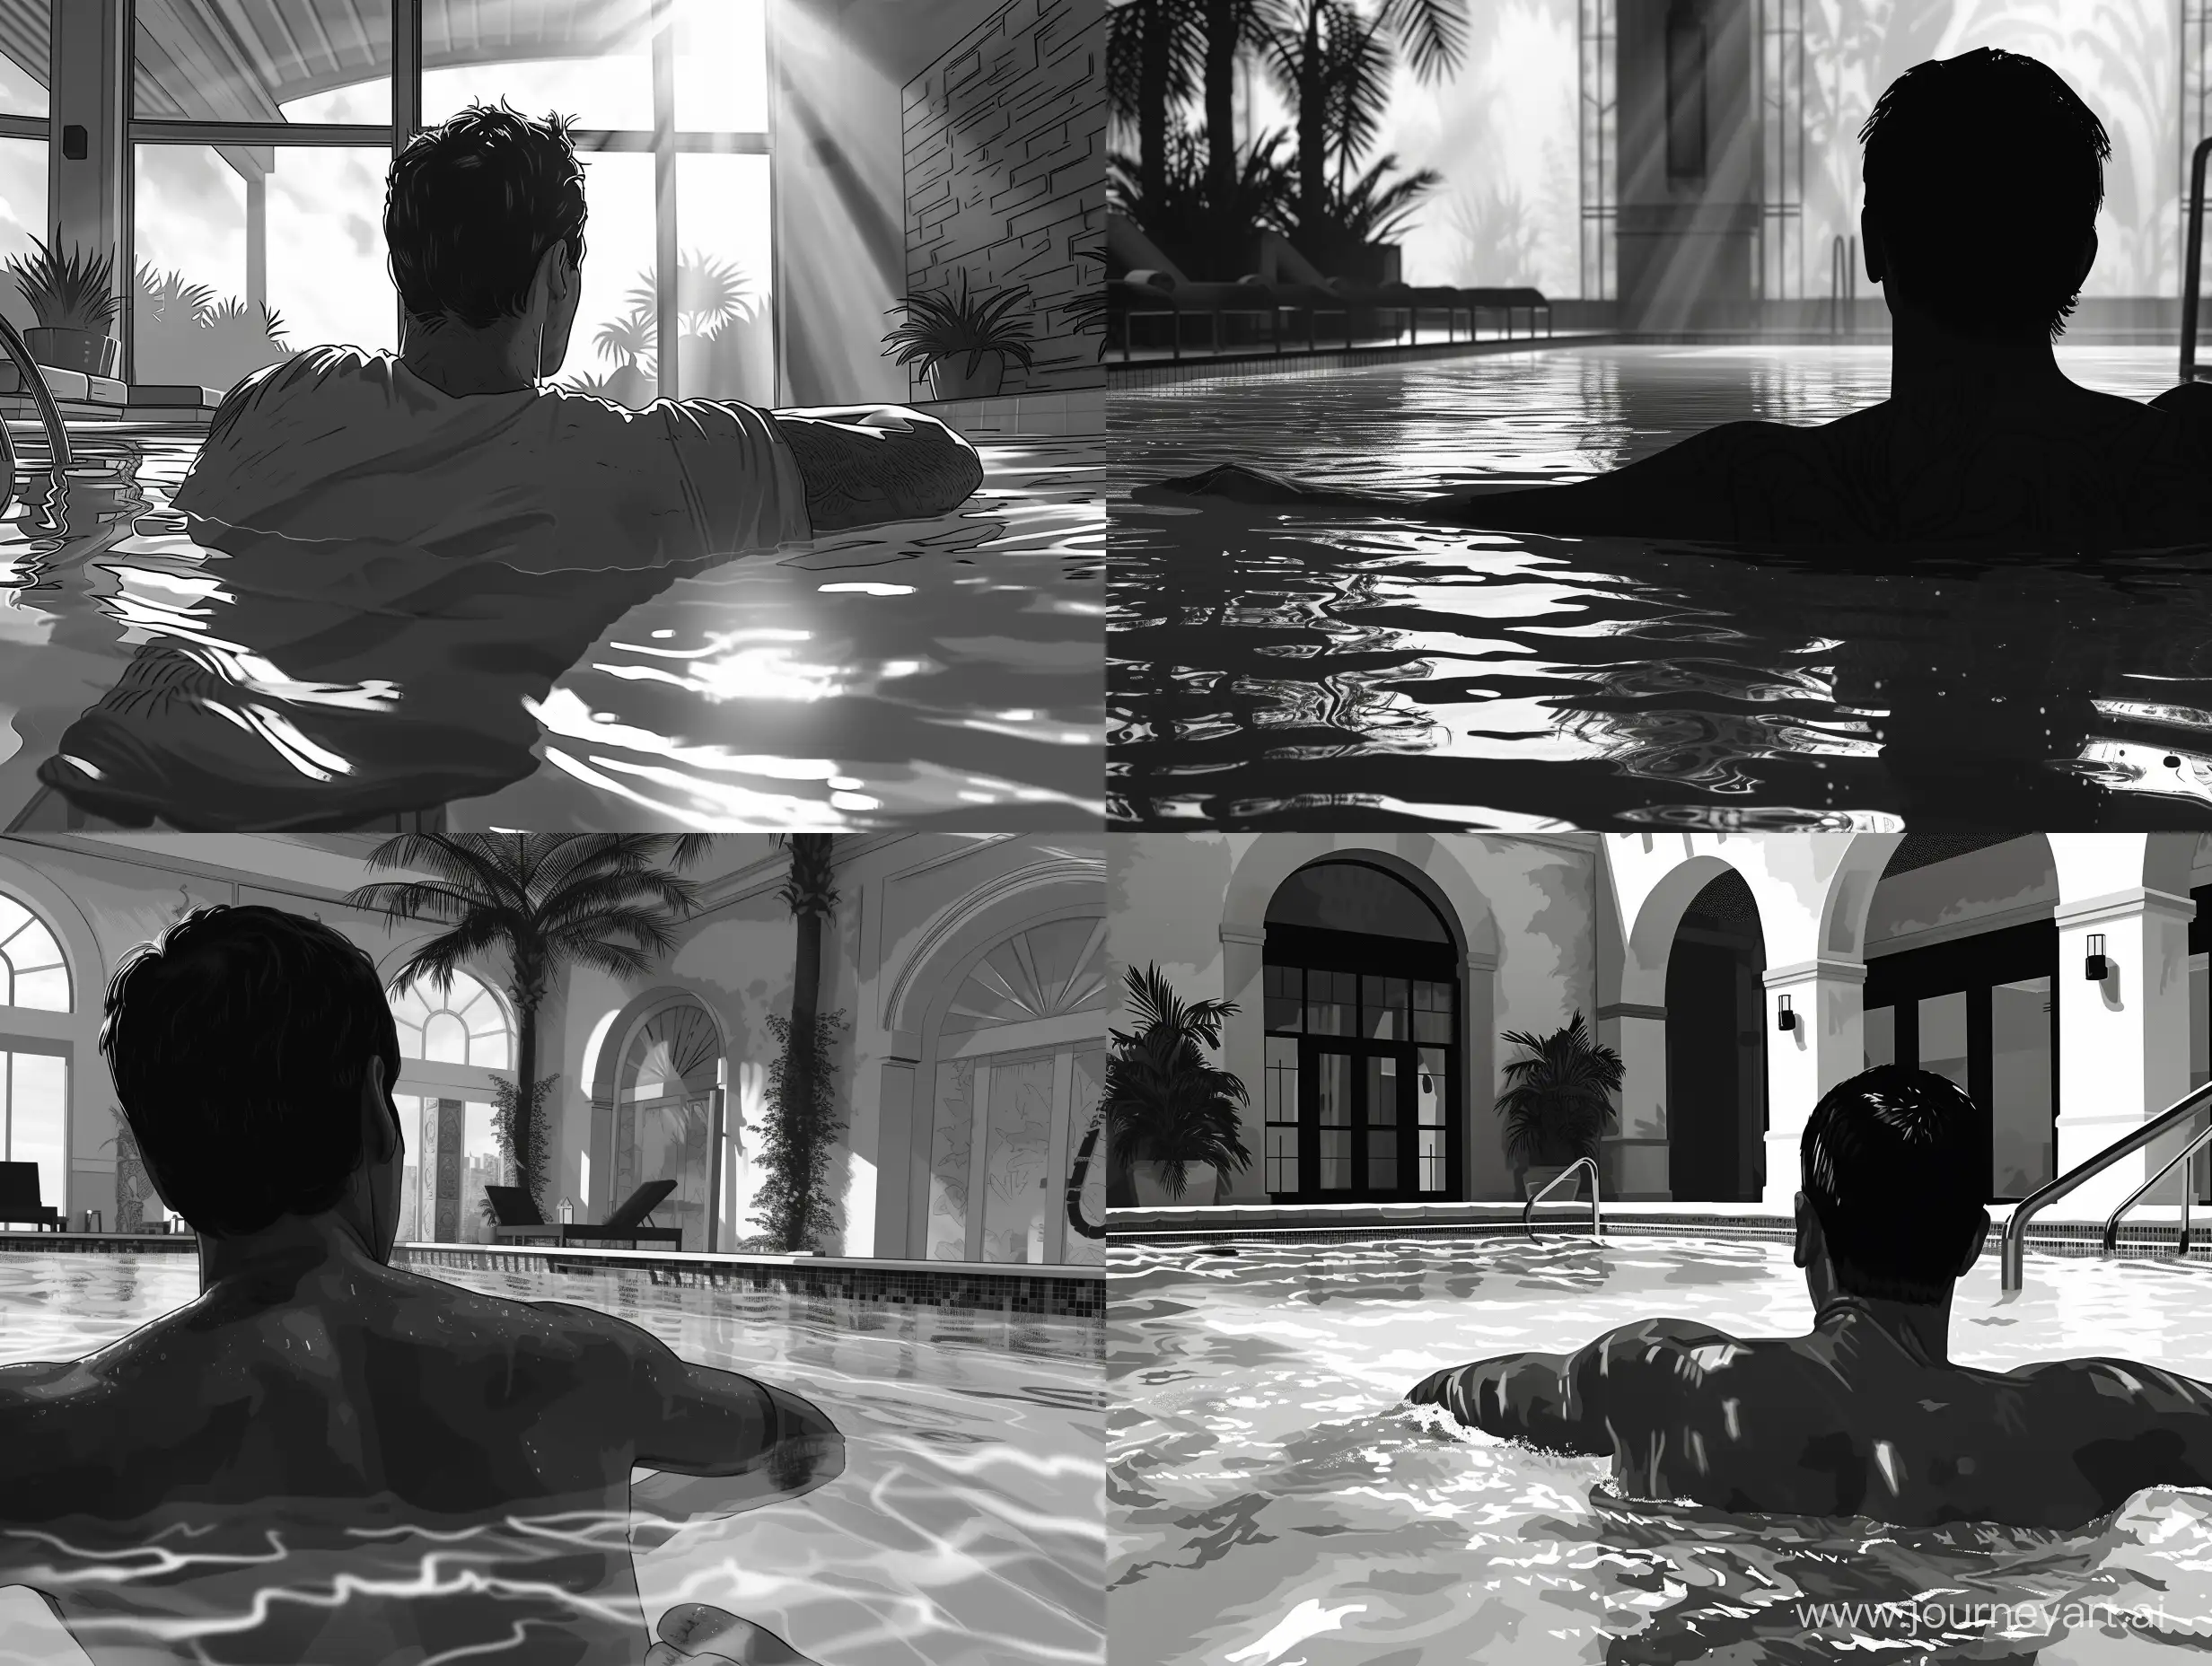 man relaxing inside the pool of a hotel, interior, closeup from behind. grand theft auto artstyle, loading screen, celshading, highly detailed, black and white.